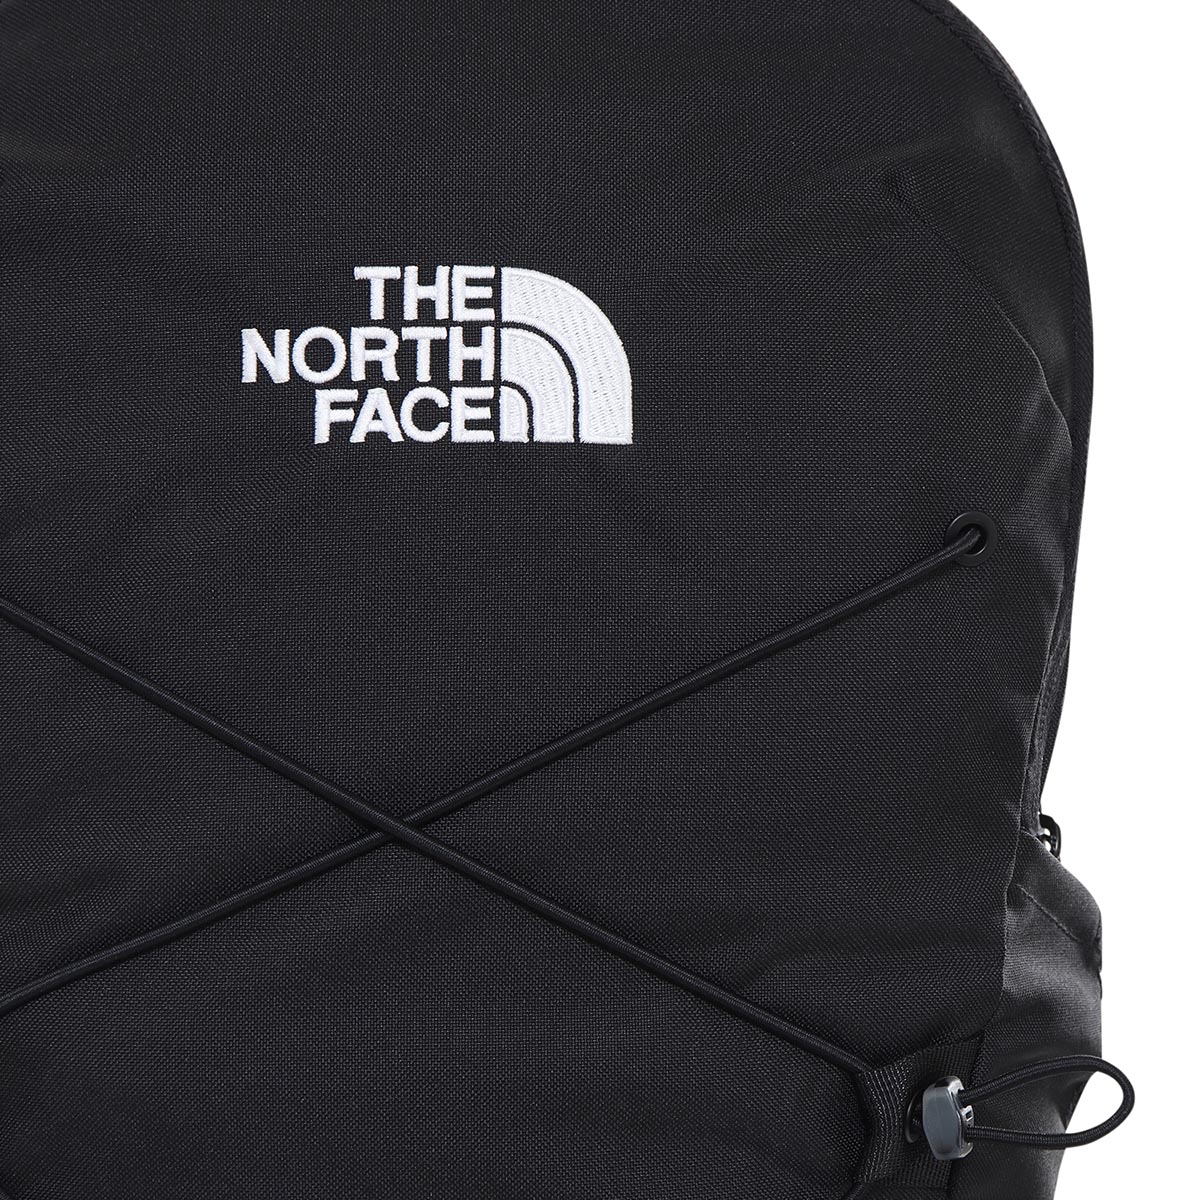 THE NORTH FACE - JESTER BACKPACK 27.5 L